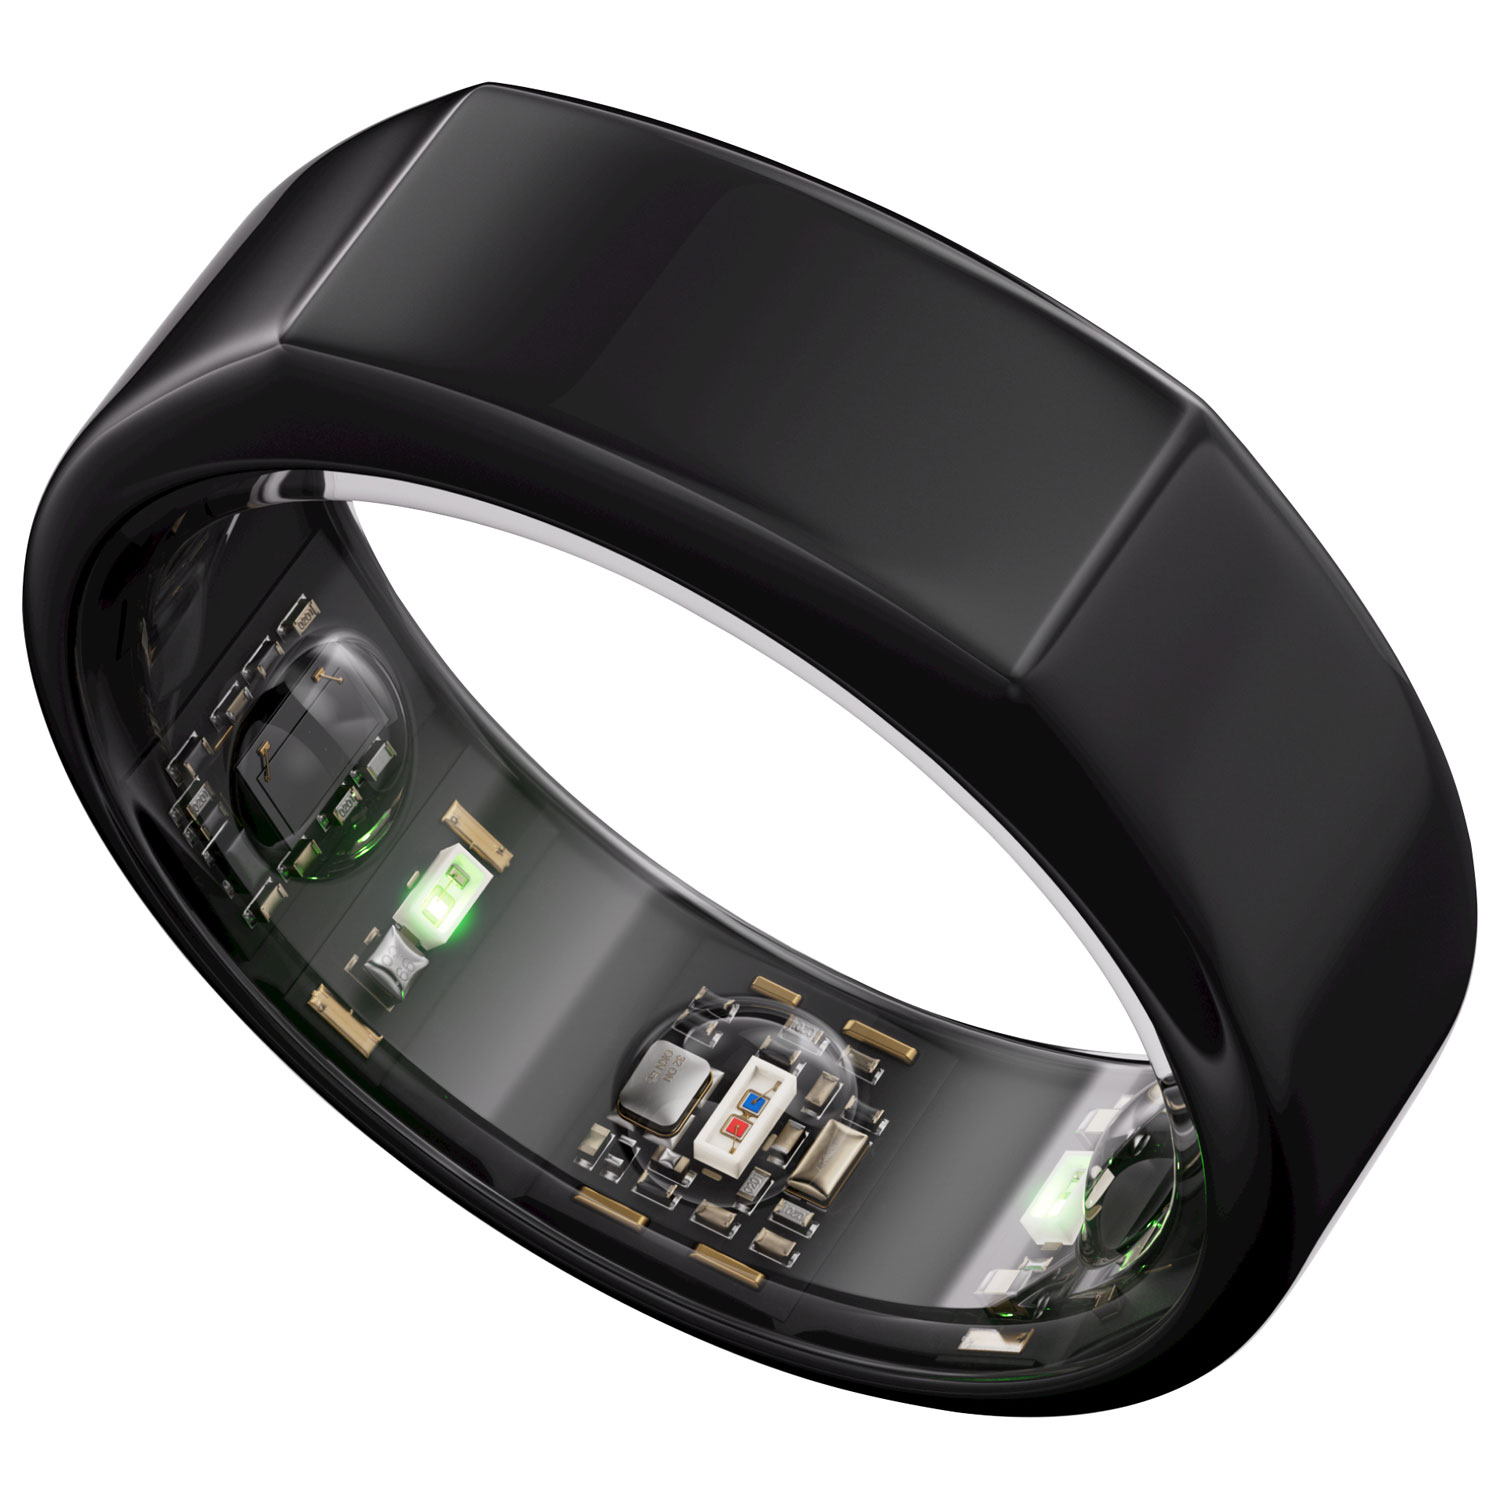 Oura Ring Gen3 - Heritage - Size 8 - Black | Best Buy Canada